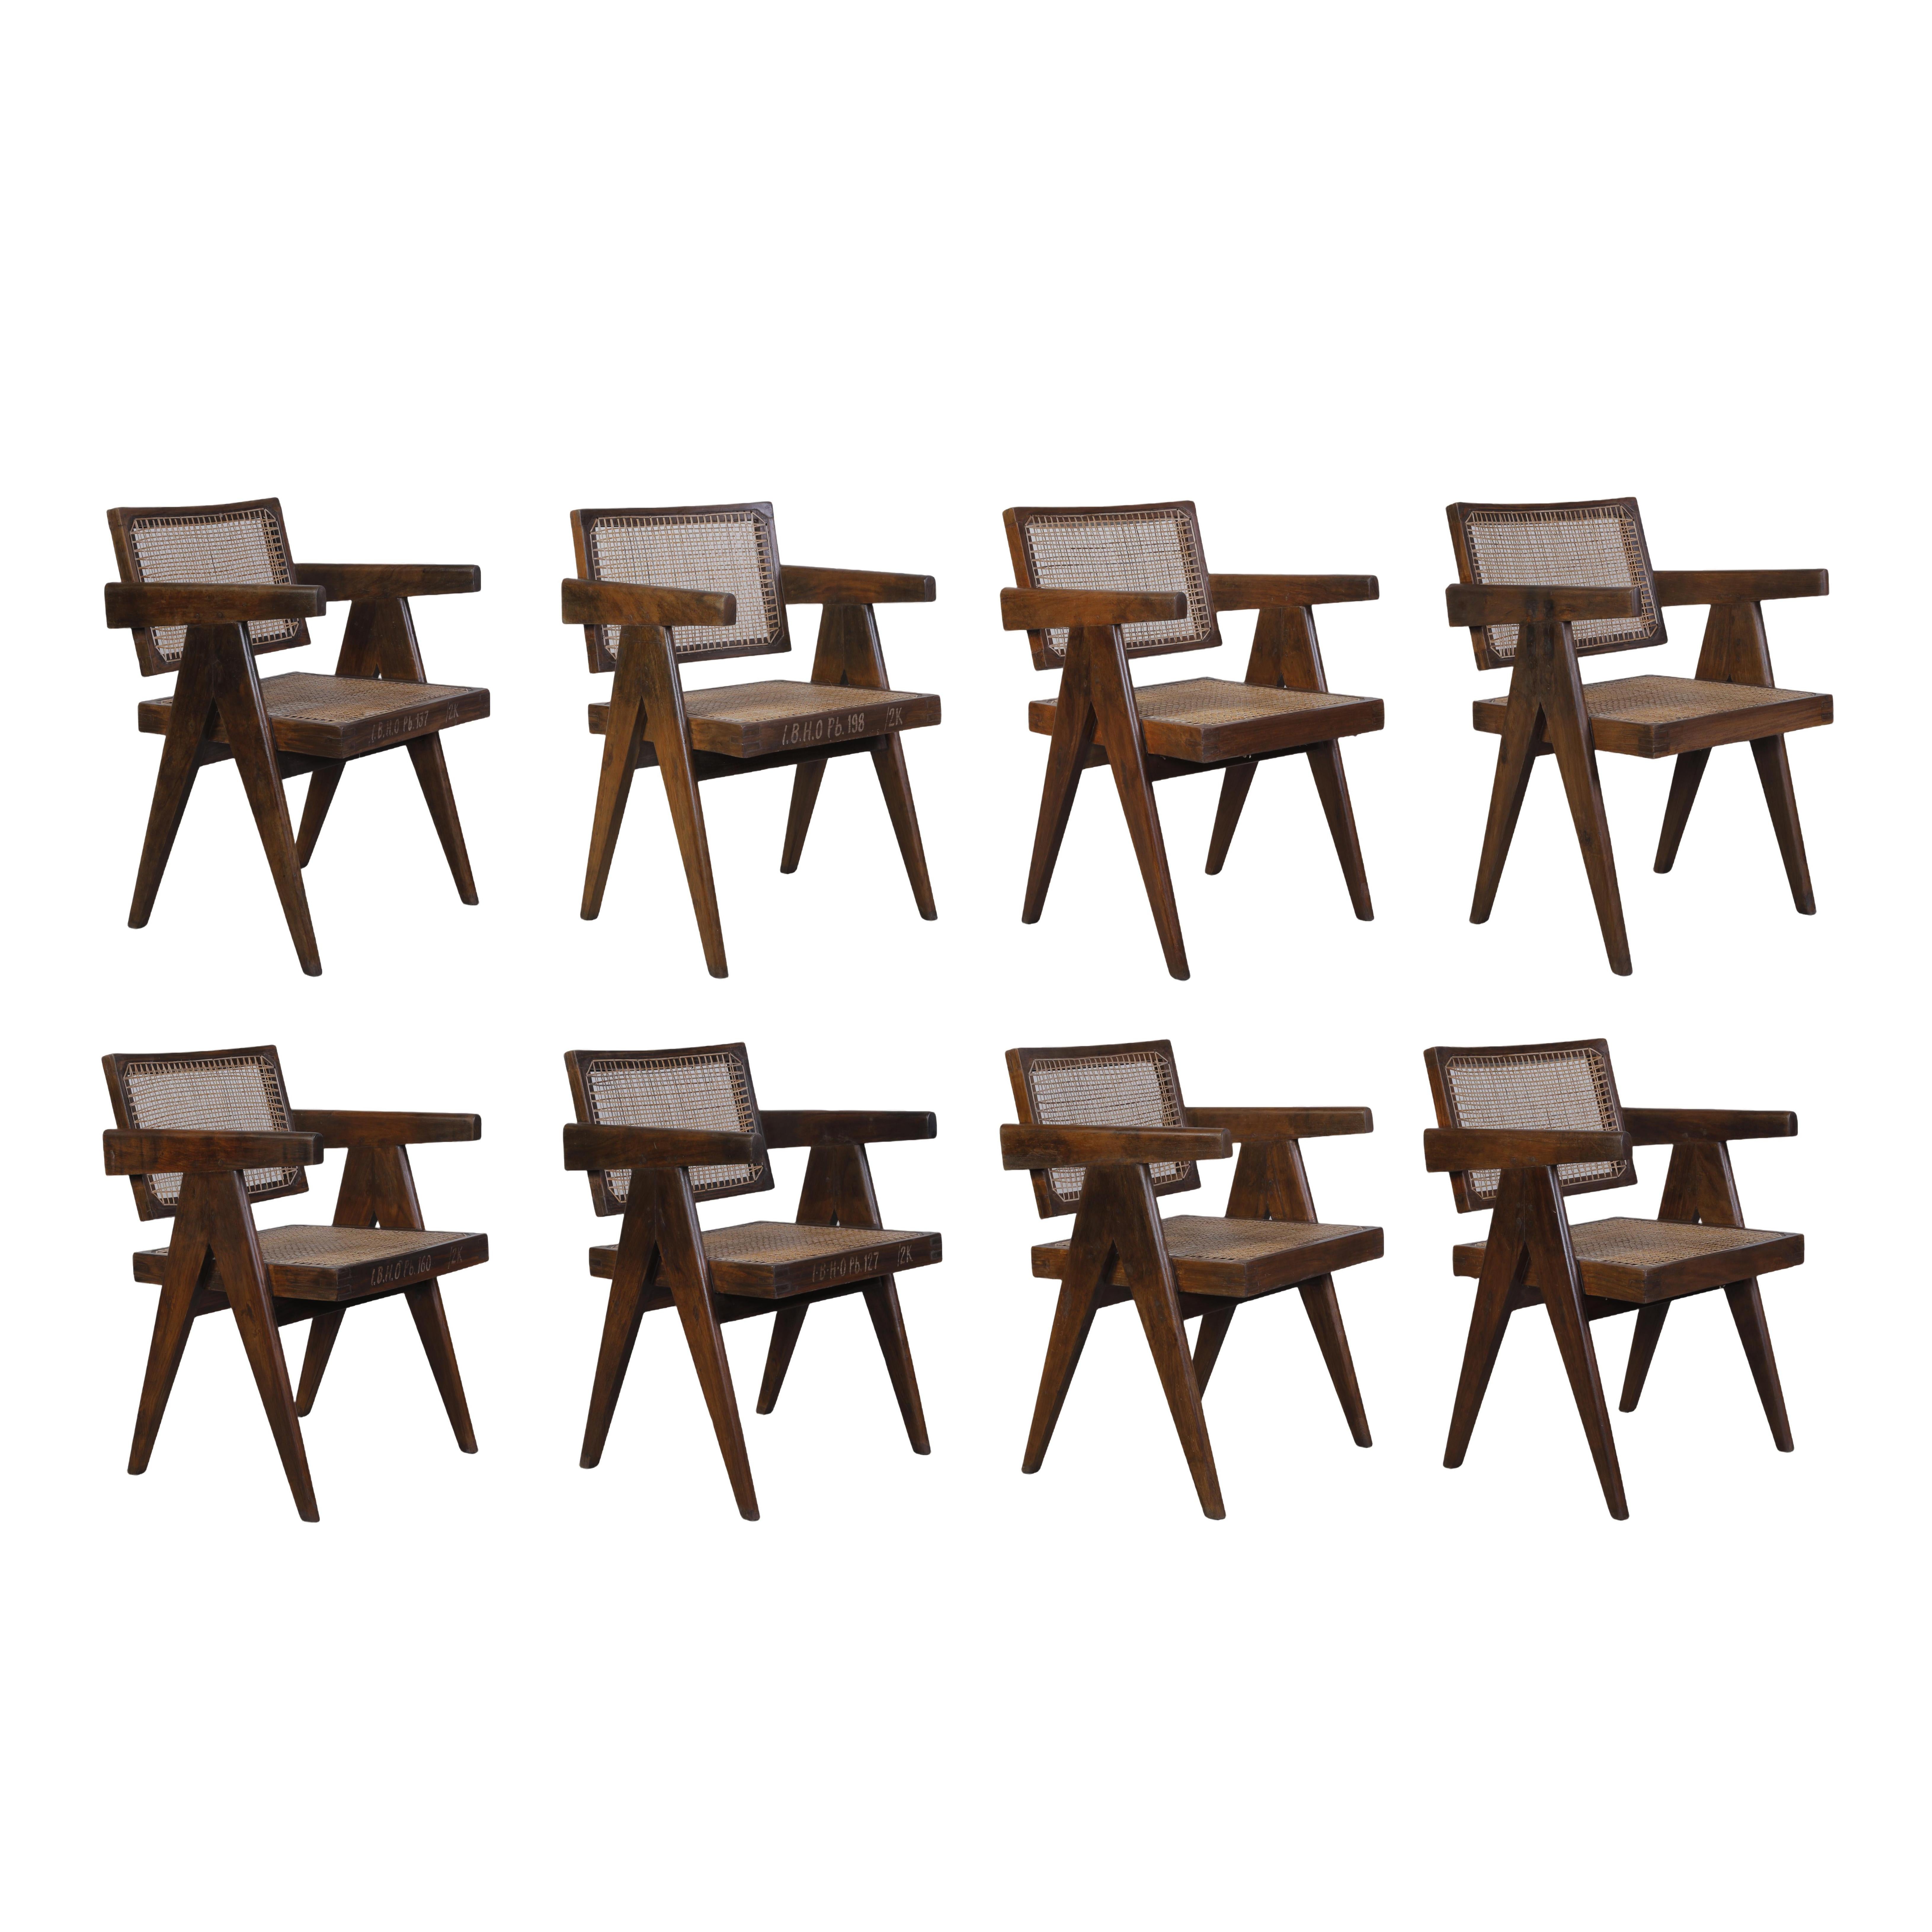 We offer a set of 8 authentic Pierre Jeanneret dining chairs (we offer 6, 10 or 12 too). Normally they are always a bit different in size, so they normally never fit. That is a rare set where dimensions are very similar. So that is a rare